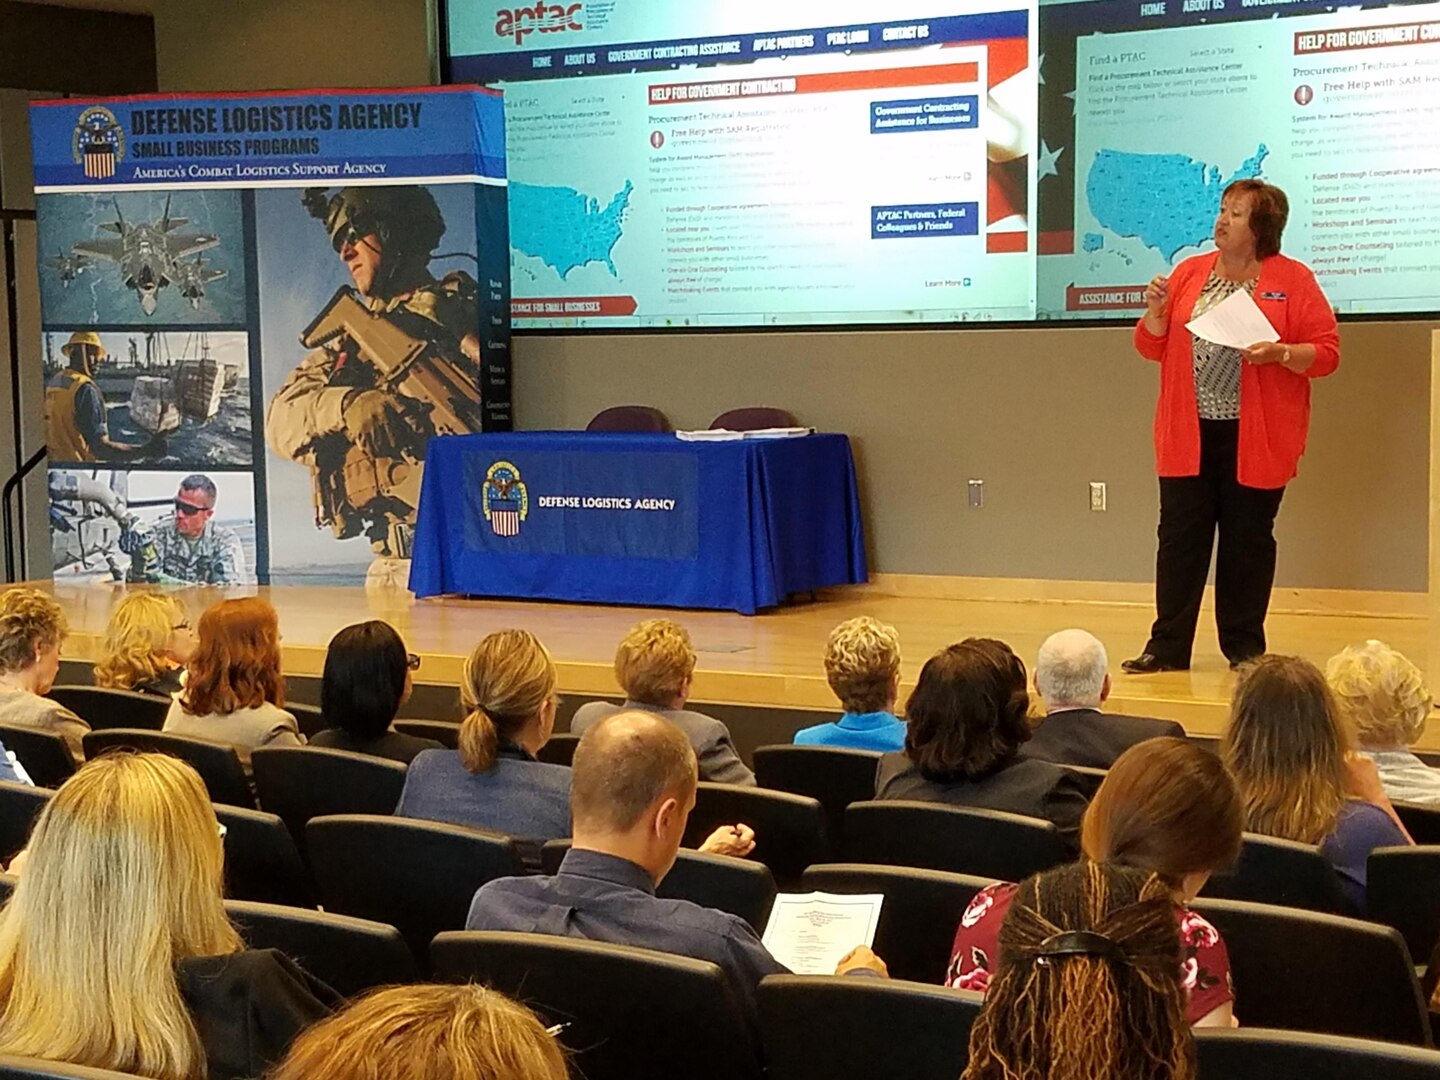 Amy Sajda, director of DLA Small Business Programs, welcomes attendees to the Subcontracting Training and Networking outreach event May 18 at George Mason University, Arlington, Virginia.